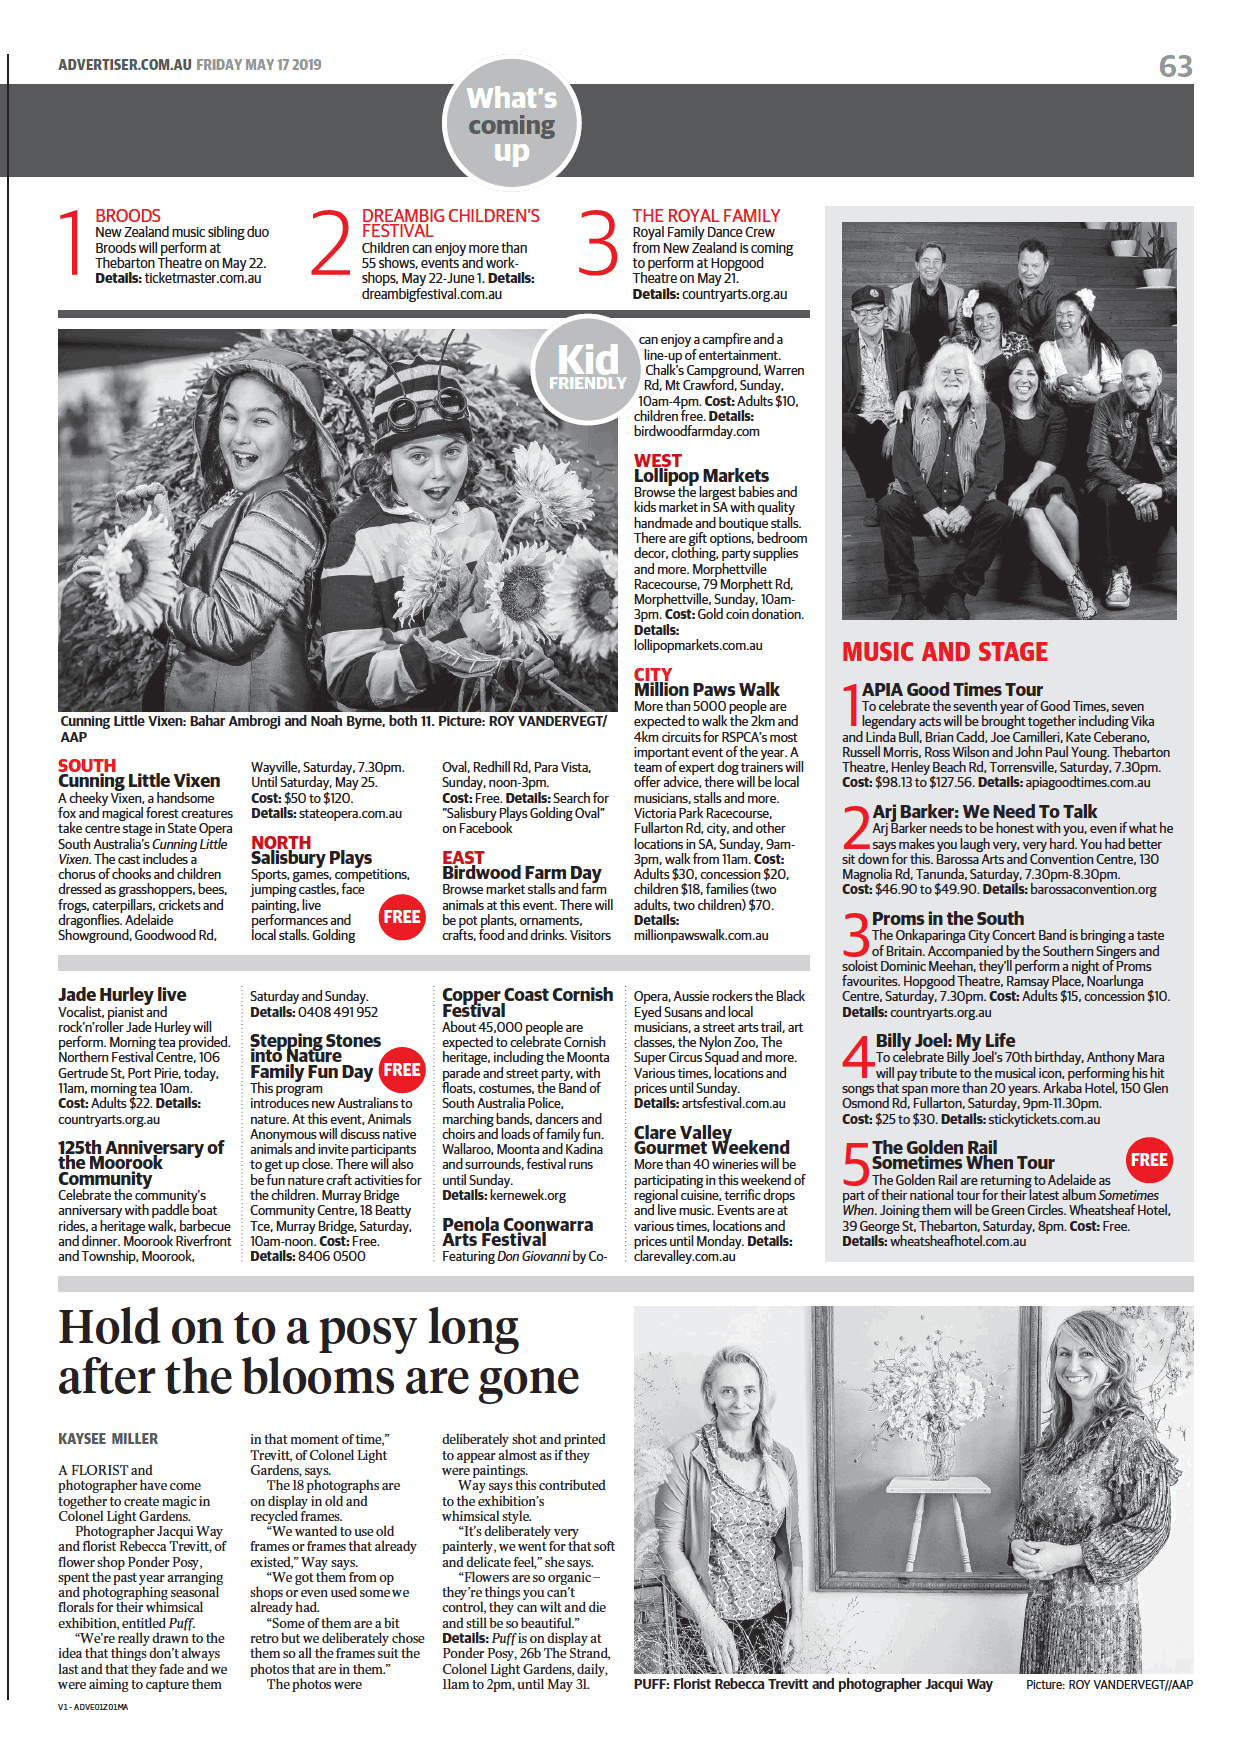 The Advertiser - Your Weekend Guide 1.png